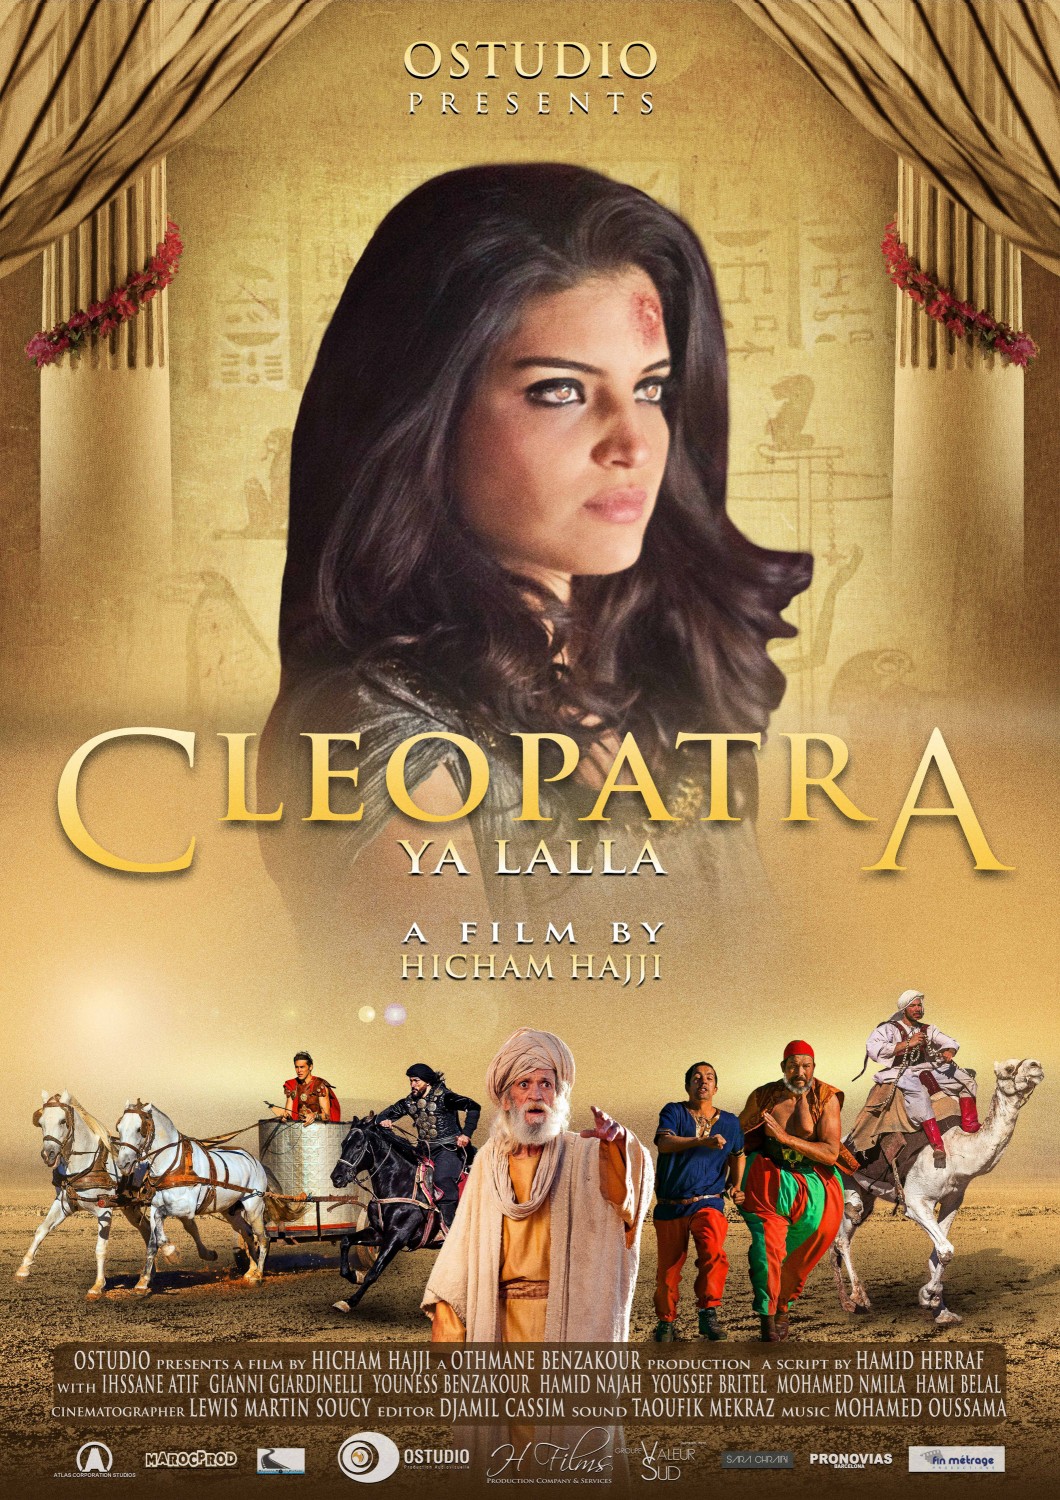 Extra Large Movie Poster Image for Cleopatra ya Lalla